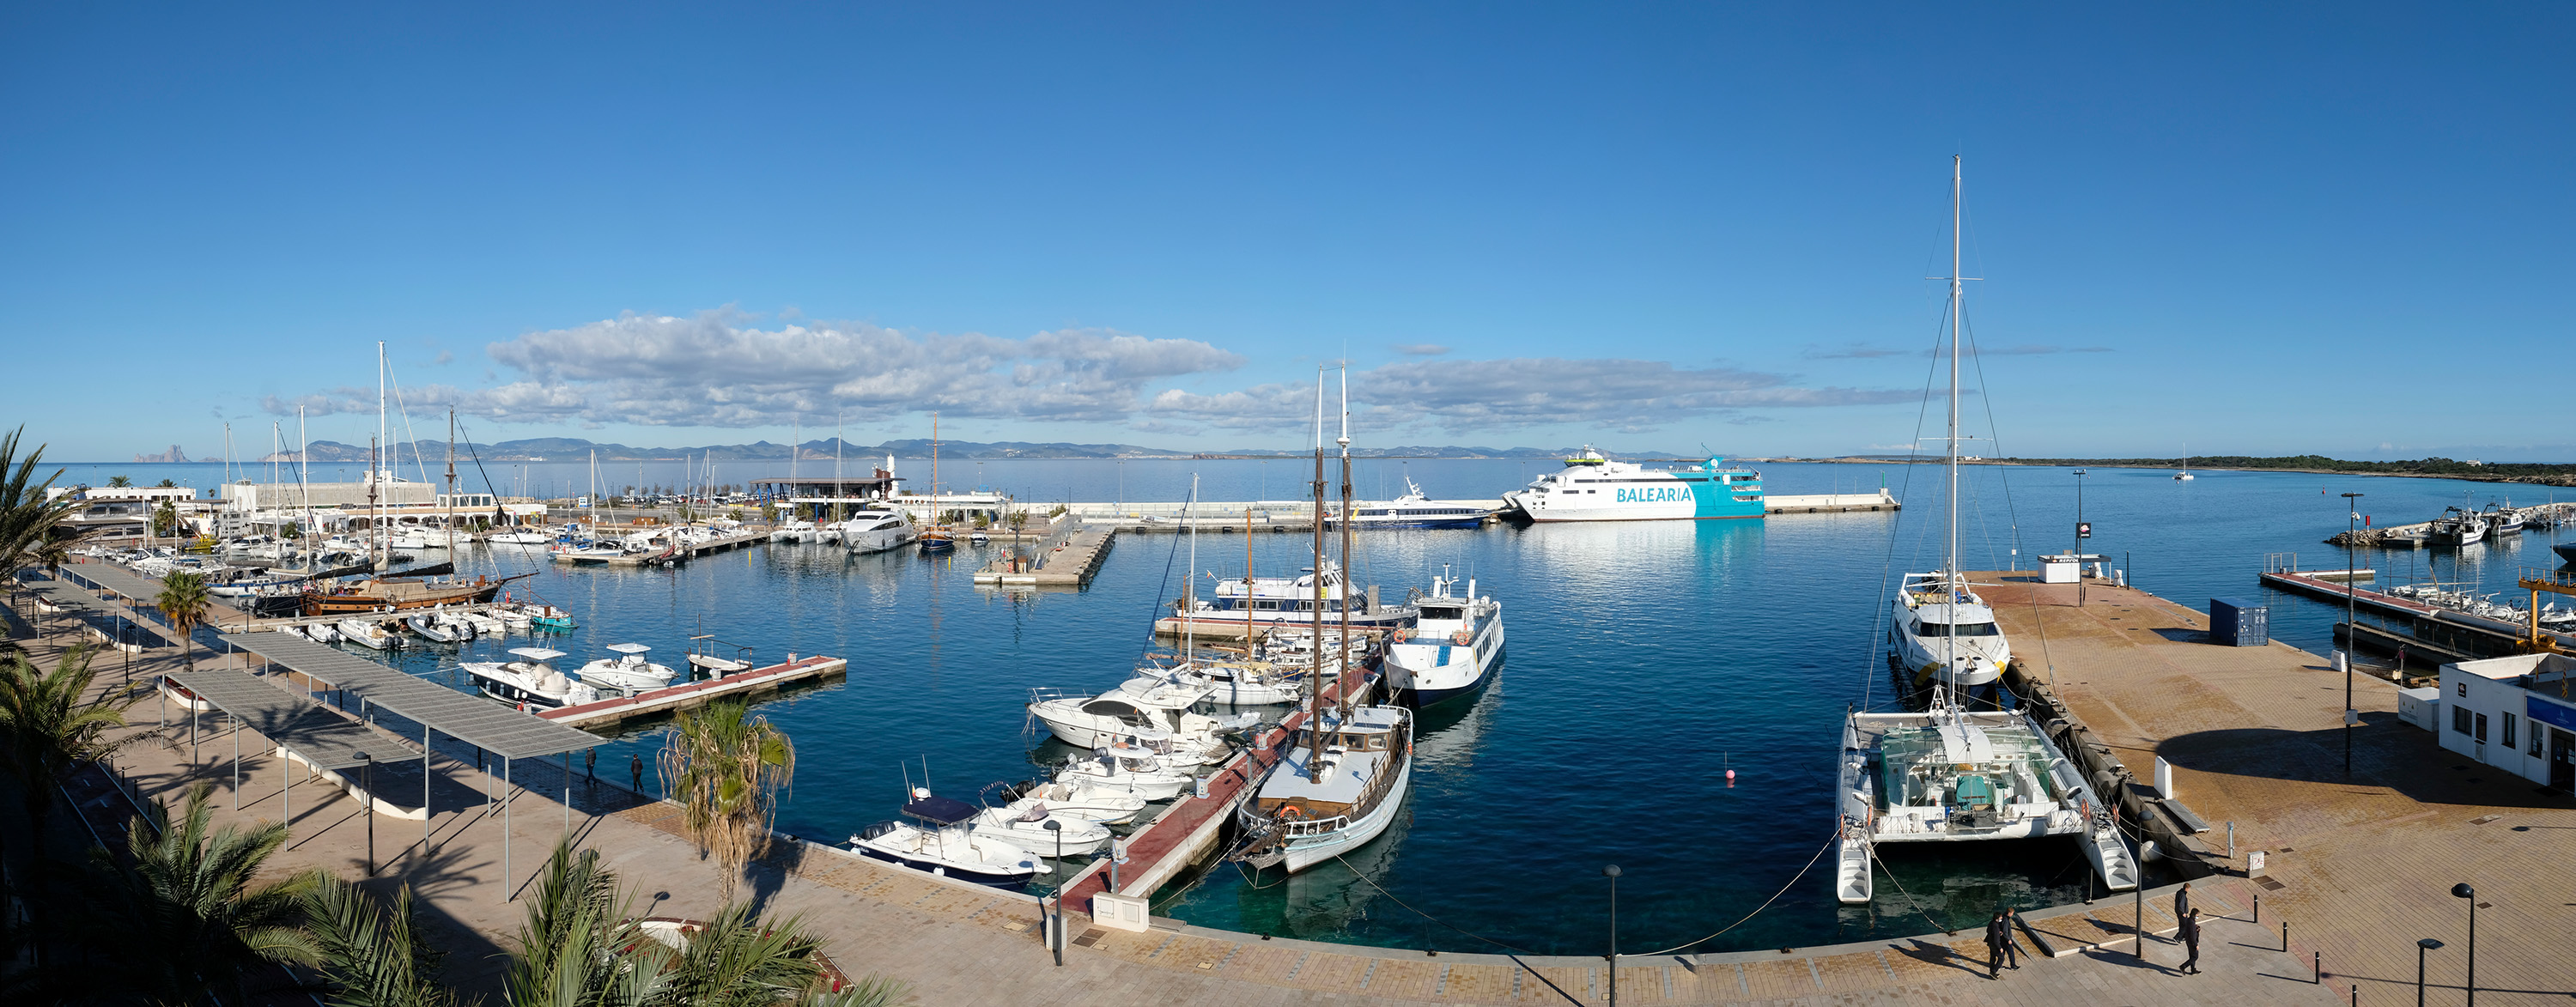 Port Med Formentera will manage the moorings and premises of the Poniente dock at the port of La Savina